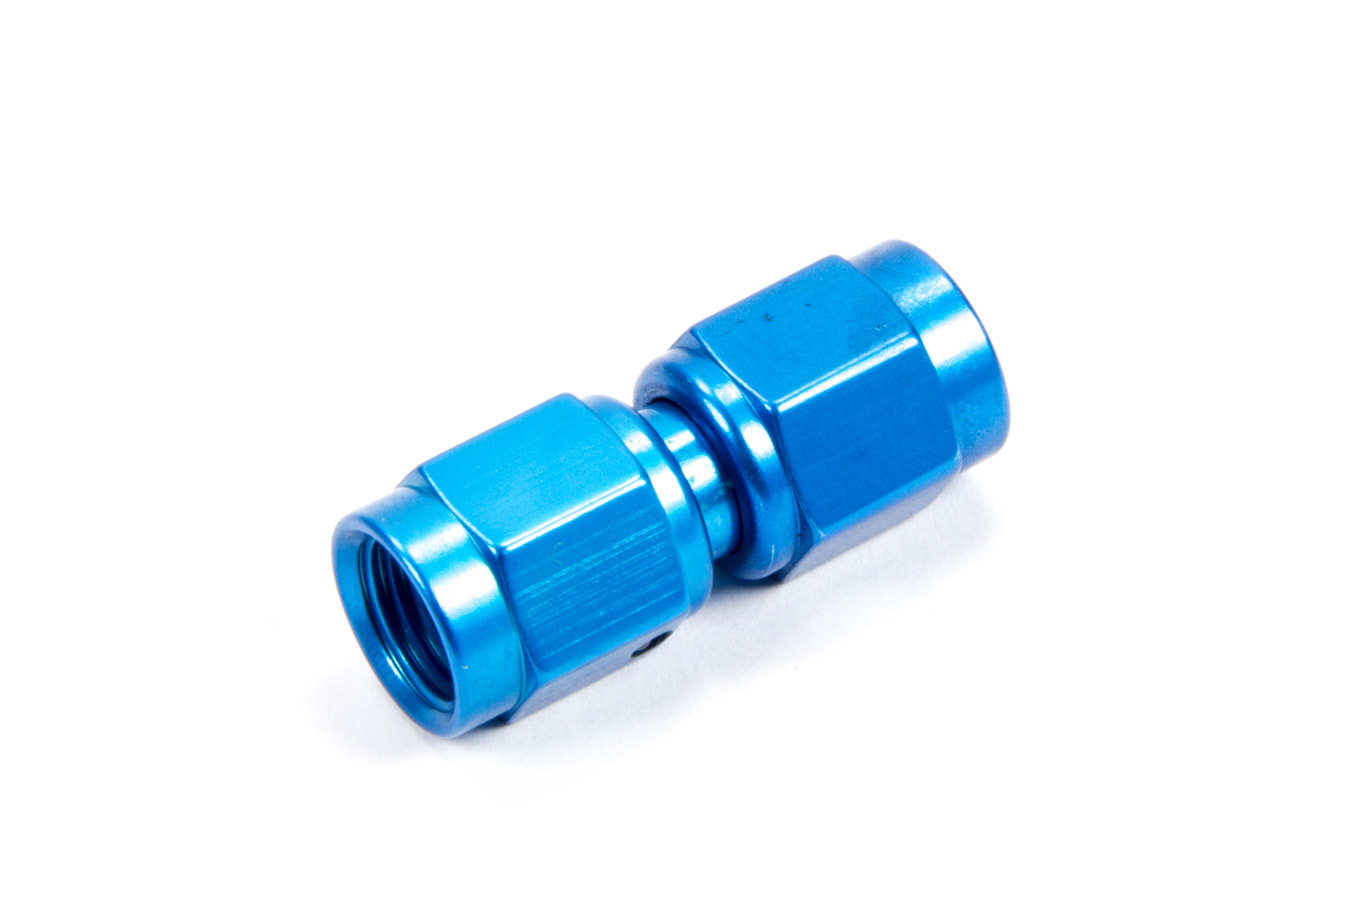 Fragola 496103 Fitting, Adapter, Straight, 3 AN Female Swivel to 3 AN Female Swivel, Aluminum, Blue Anodized, Each